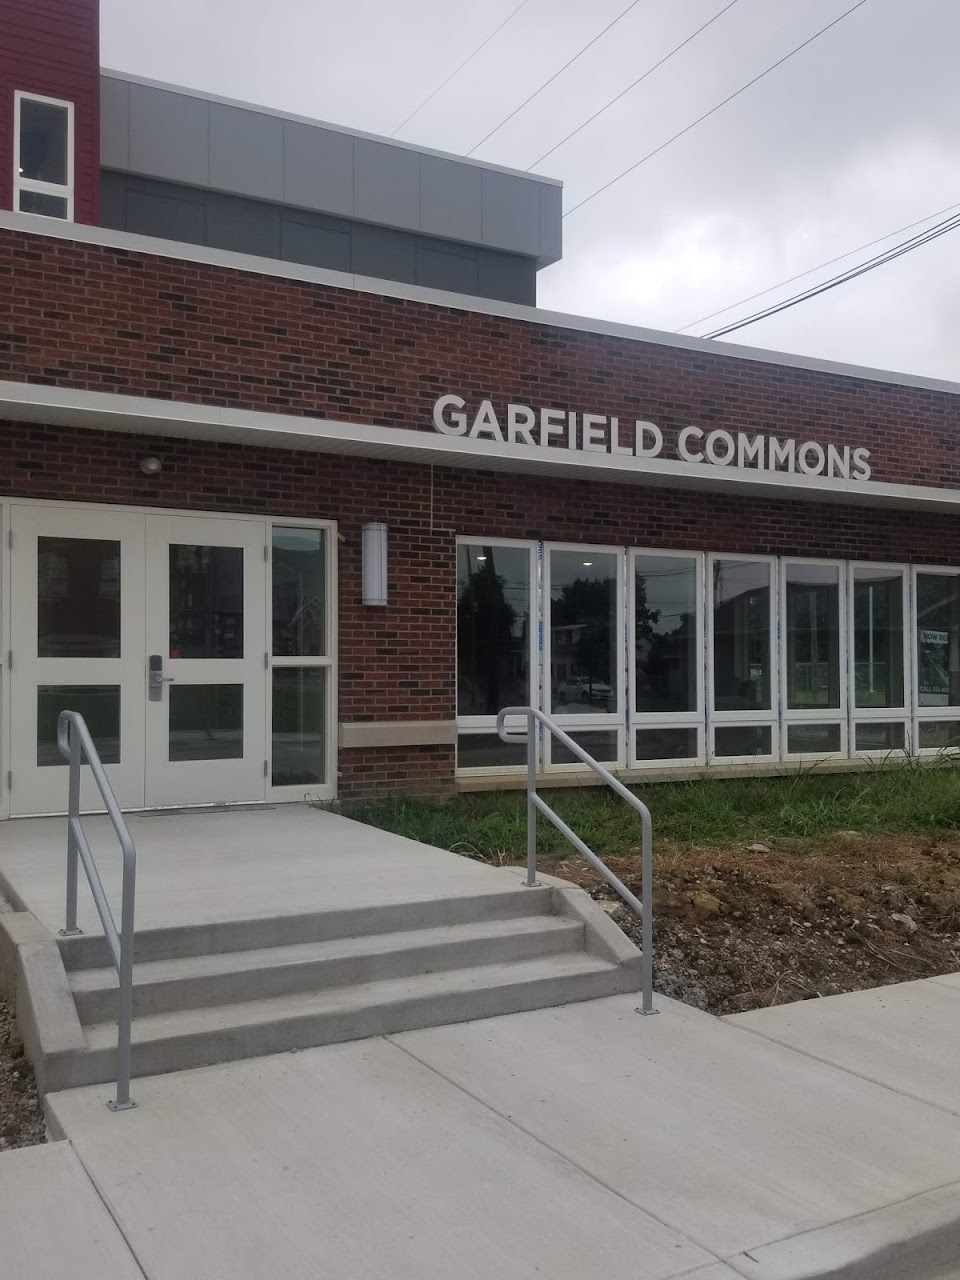 Photo of GARFIELD COMMONS at 422 GARFIELD AVE EVANSVILLE, IN 47710